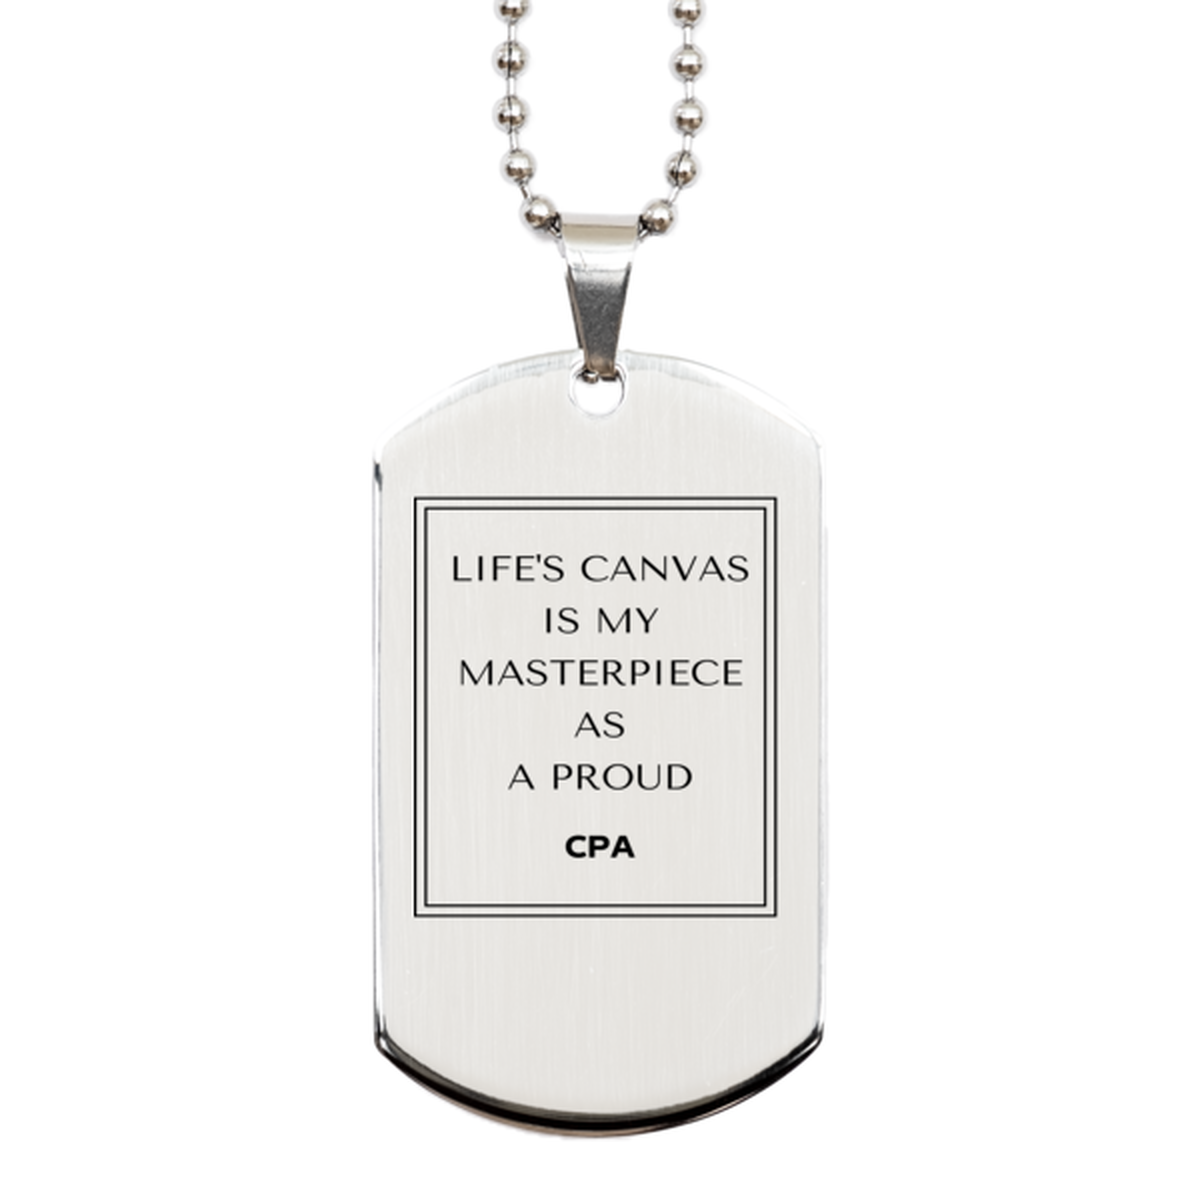 Proud CPA Gifts, Life's canvas is my masterpiece, Epic Birthday Christmas Unique Silver Dog Tag For CPA, Coworkers, Men, Women, Friends